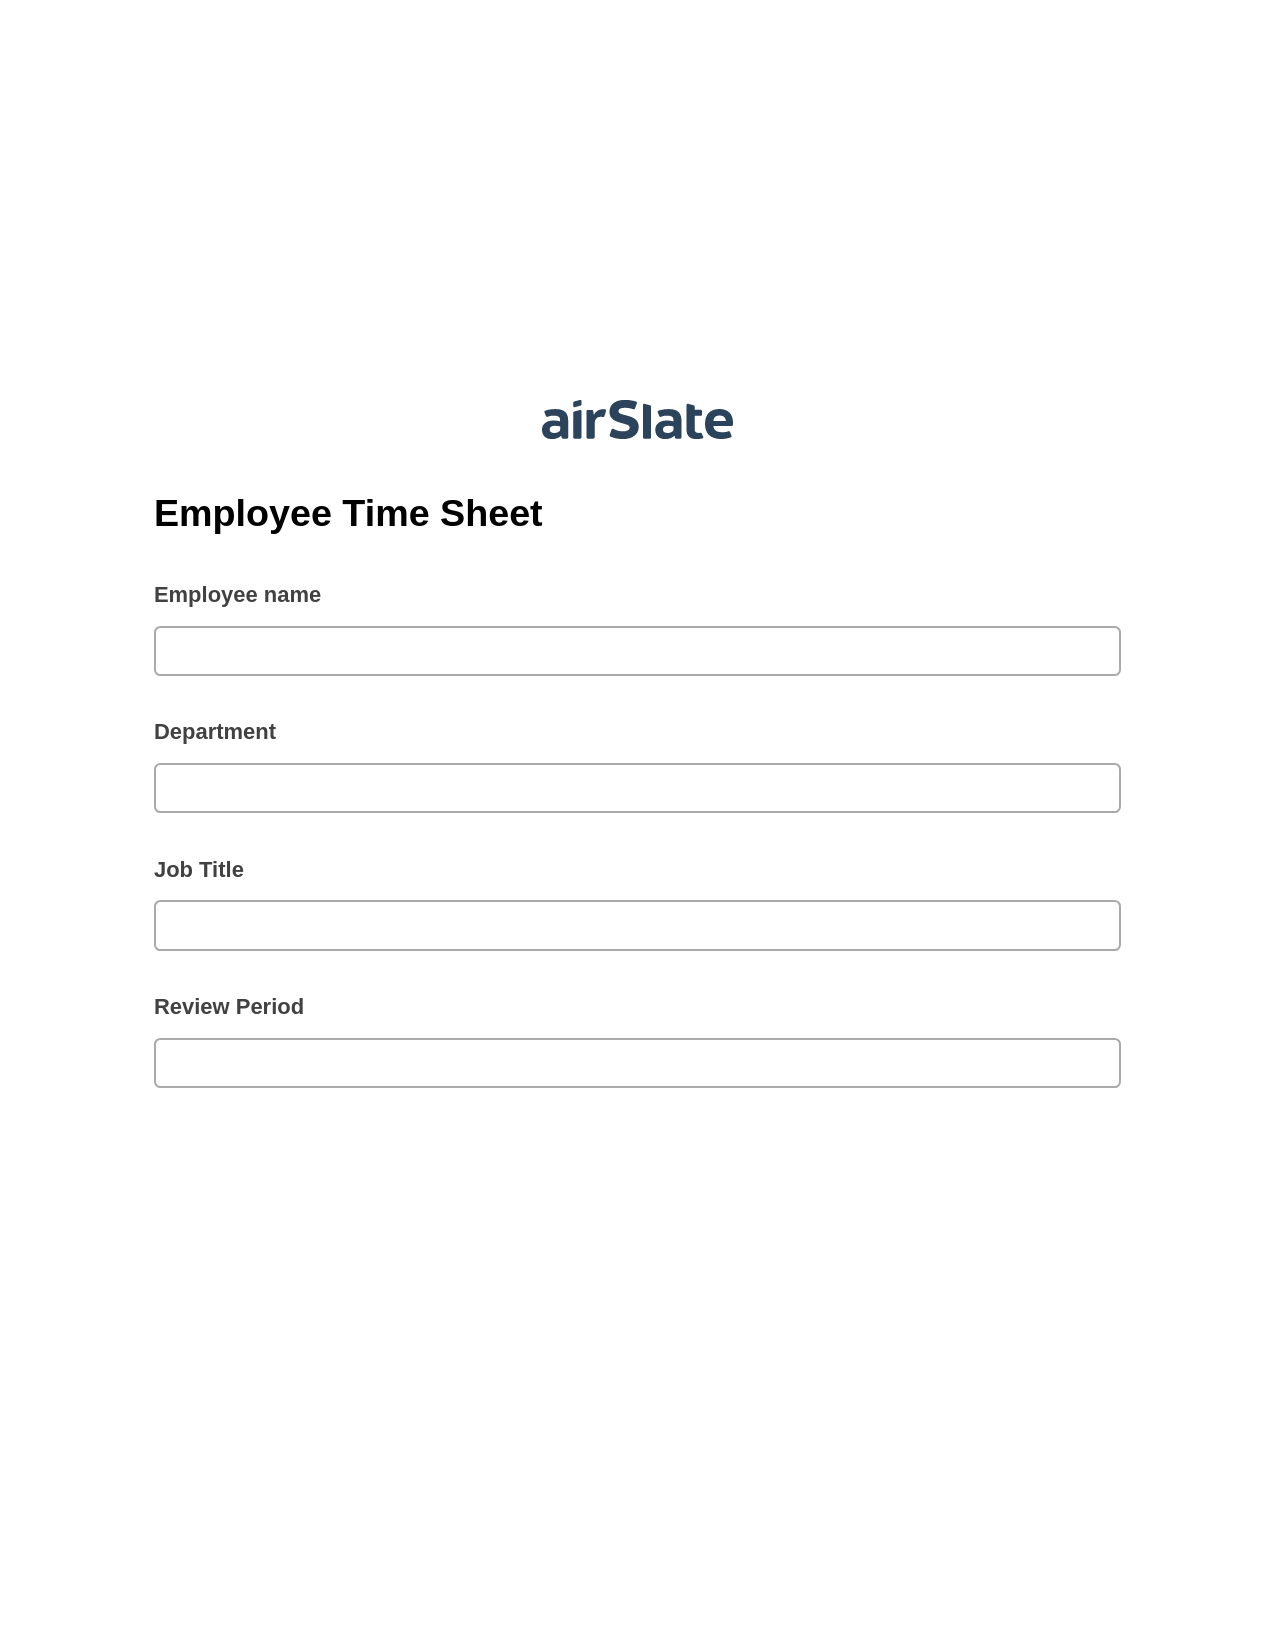 Employee Time Sheet Pre-fill from MySQL Bot, Create slate addon, Archive to OneDrive Bot